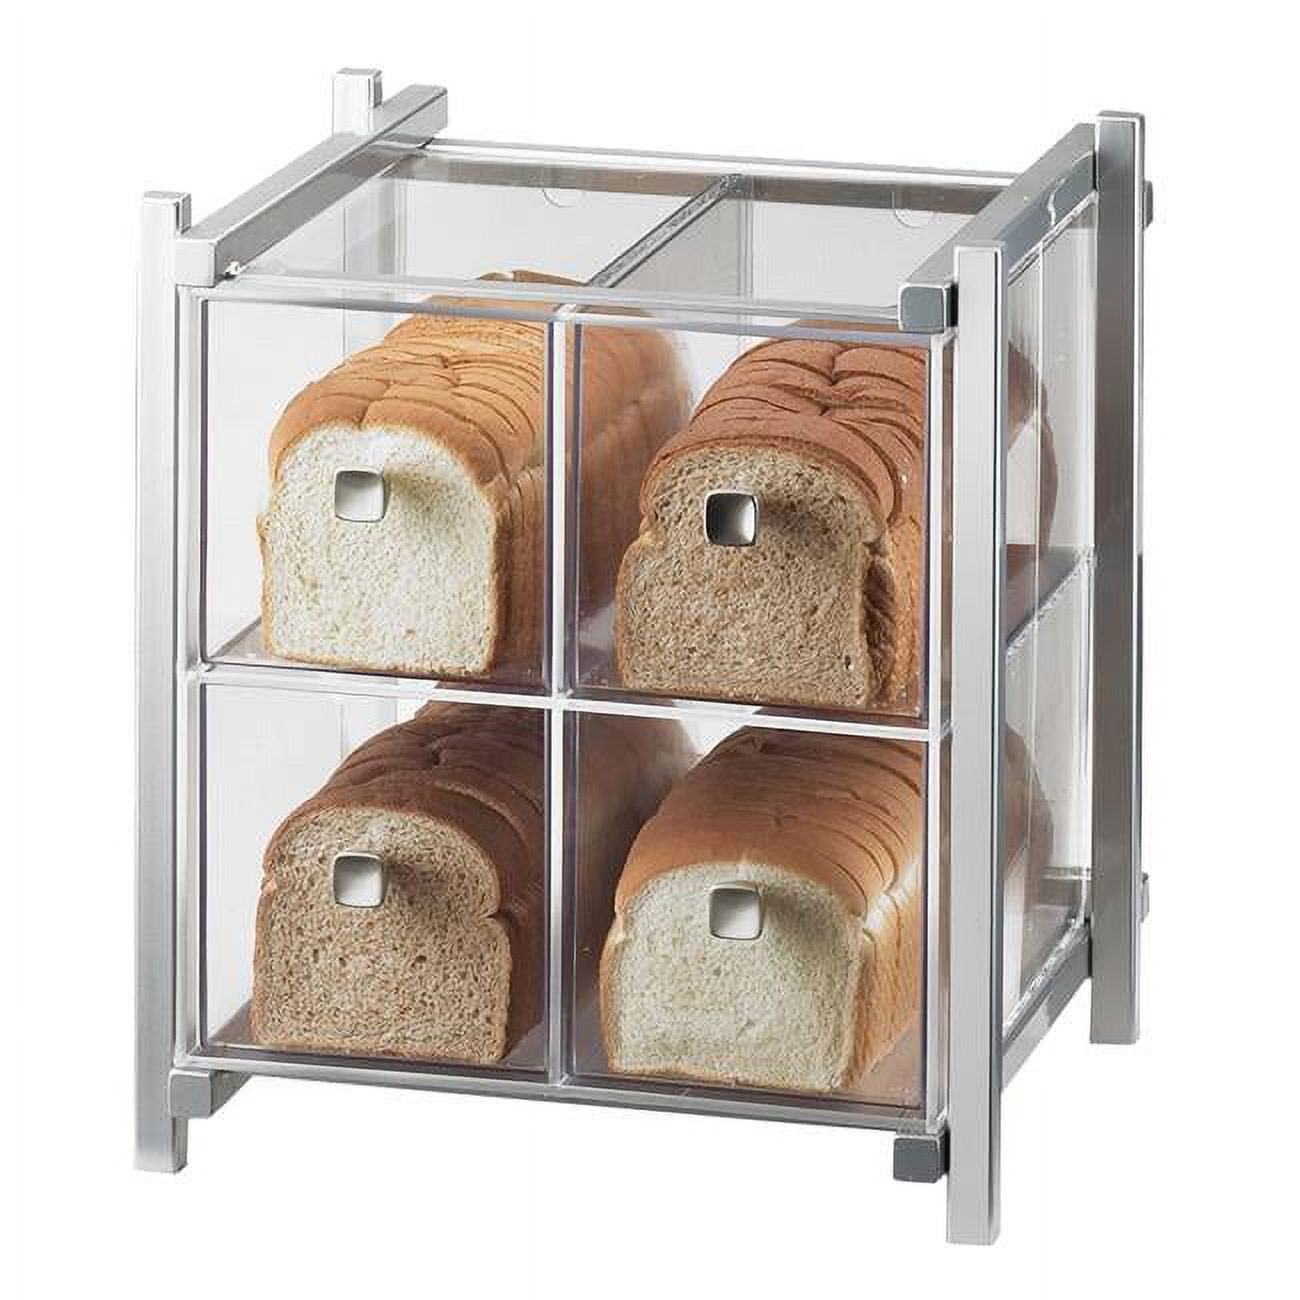 1146-74 One By One Four Drawer Bread Display Case, Silver - 14 X 14.75 X 15.625 In.